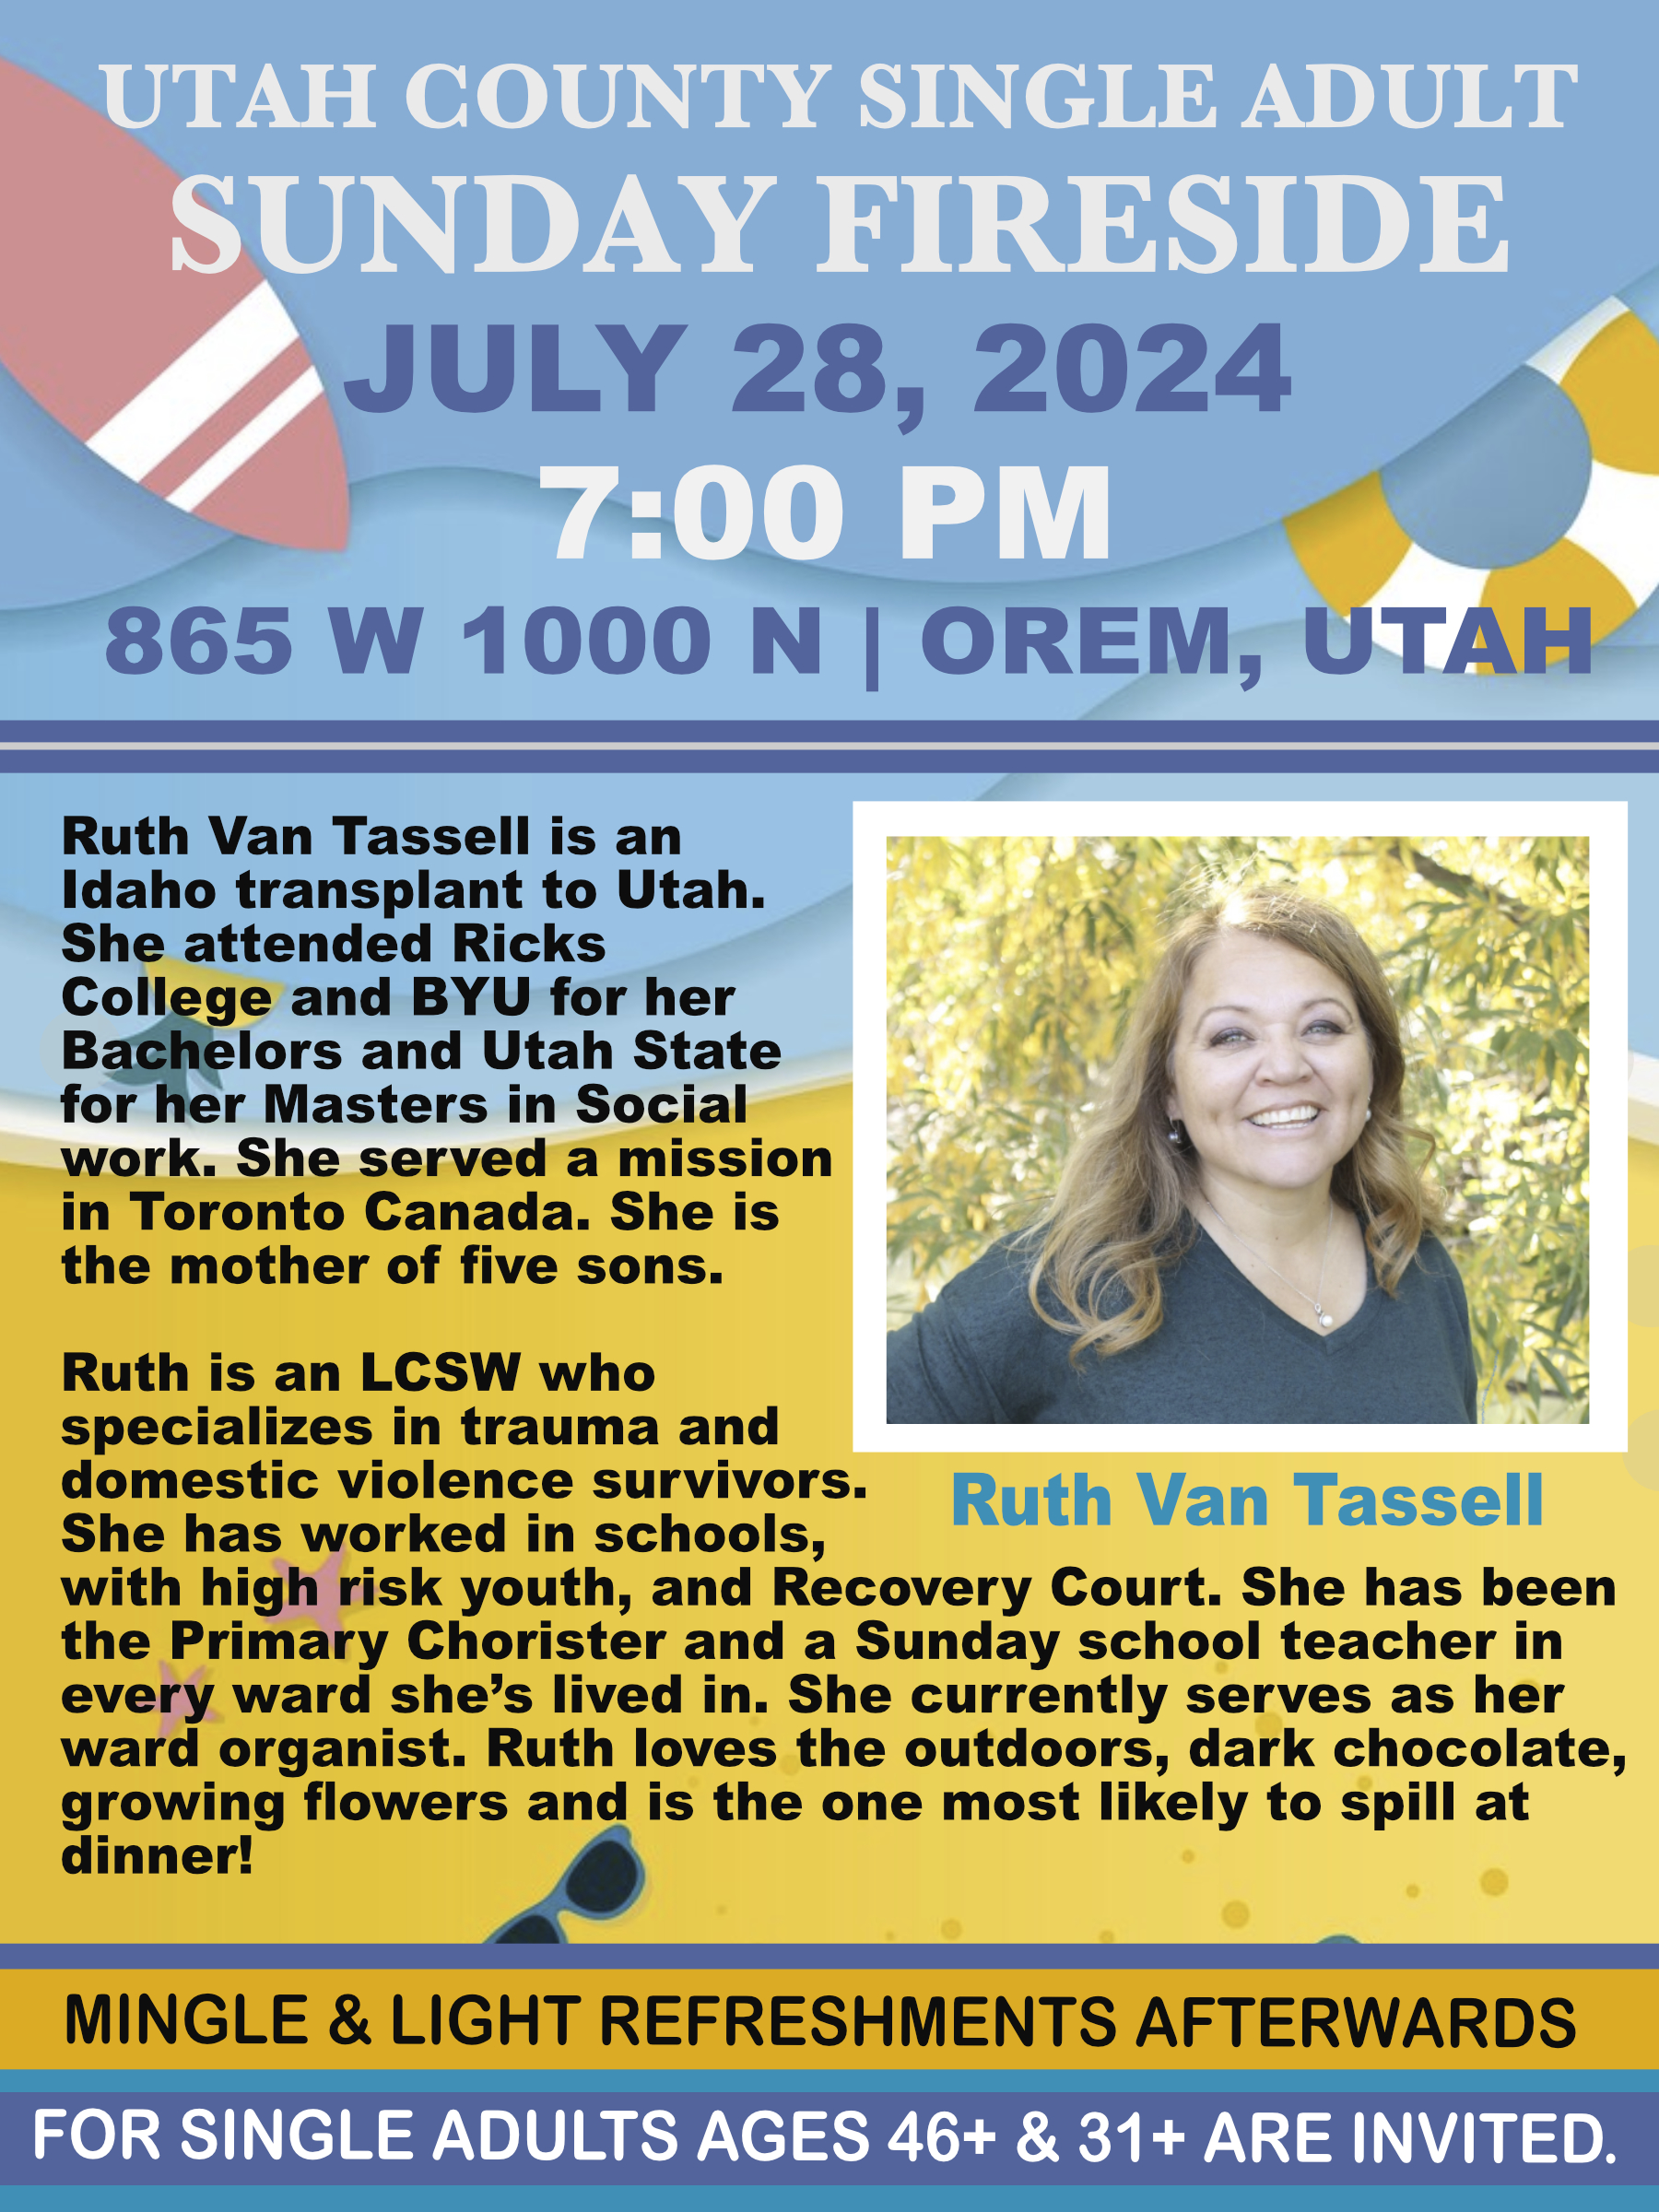 upcoming fireside on July 28 2024 with Ruth Van Tassell.